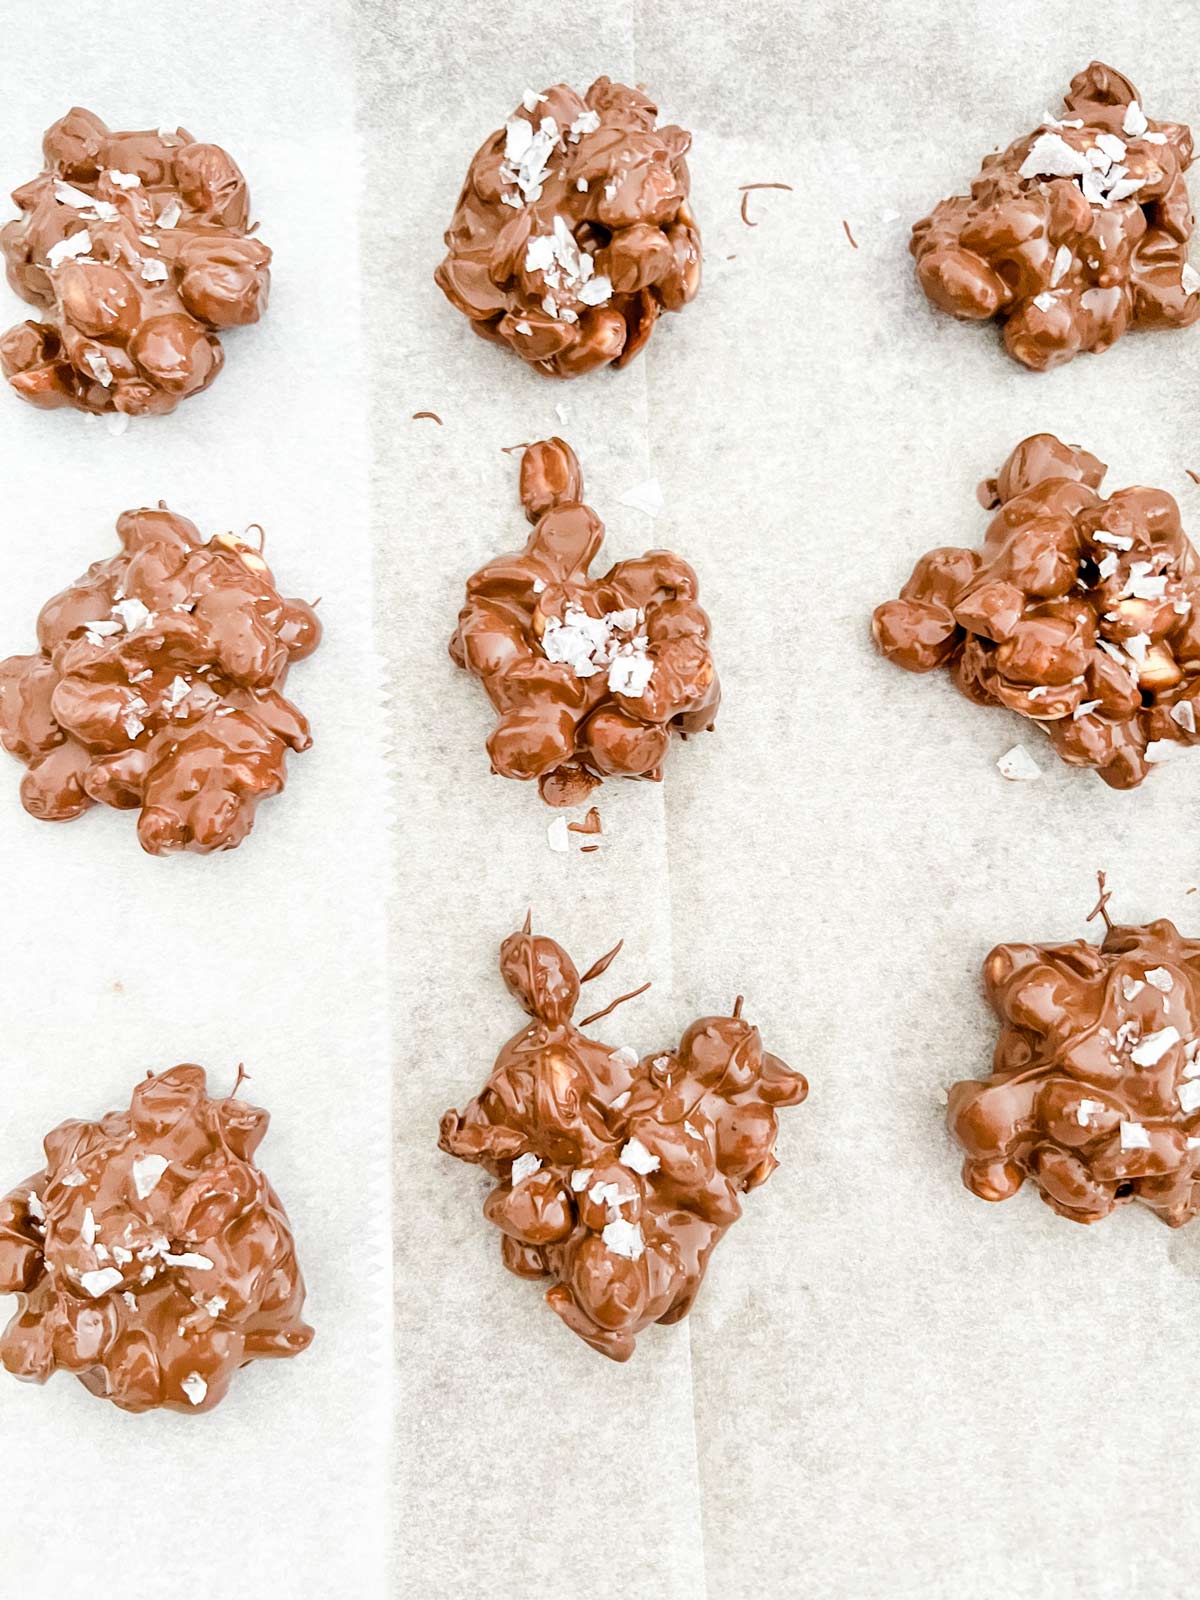 Photo of peanut clusters on a parchment lined baking sheet.